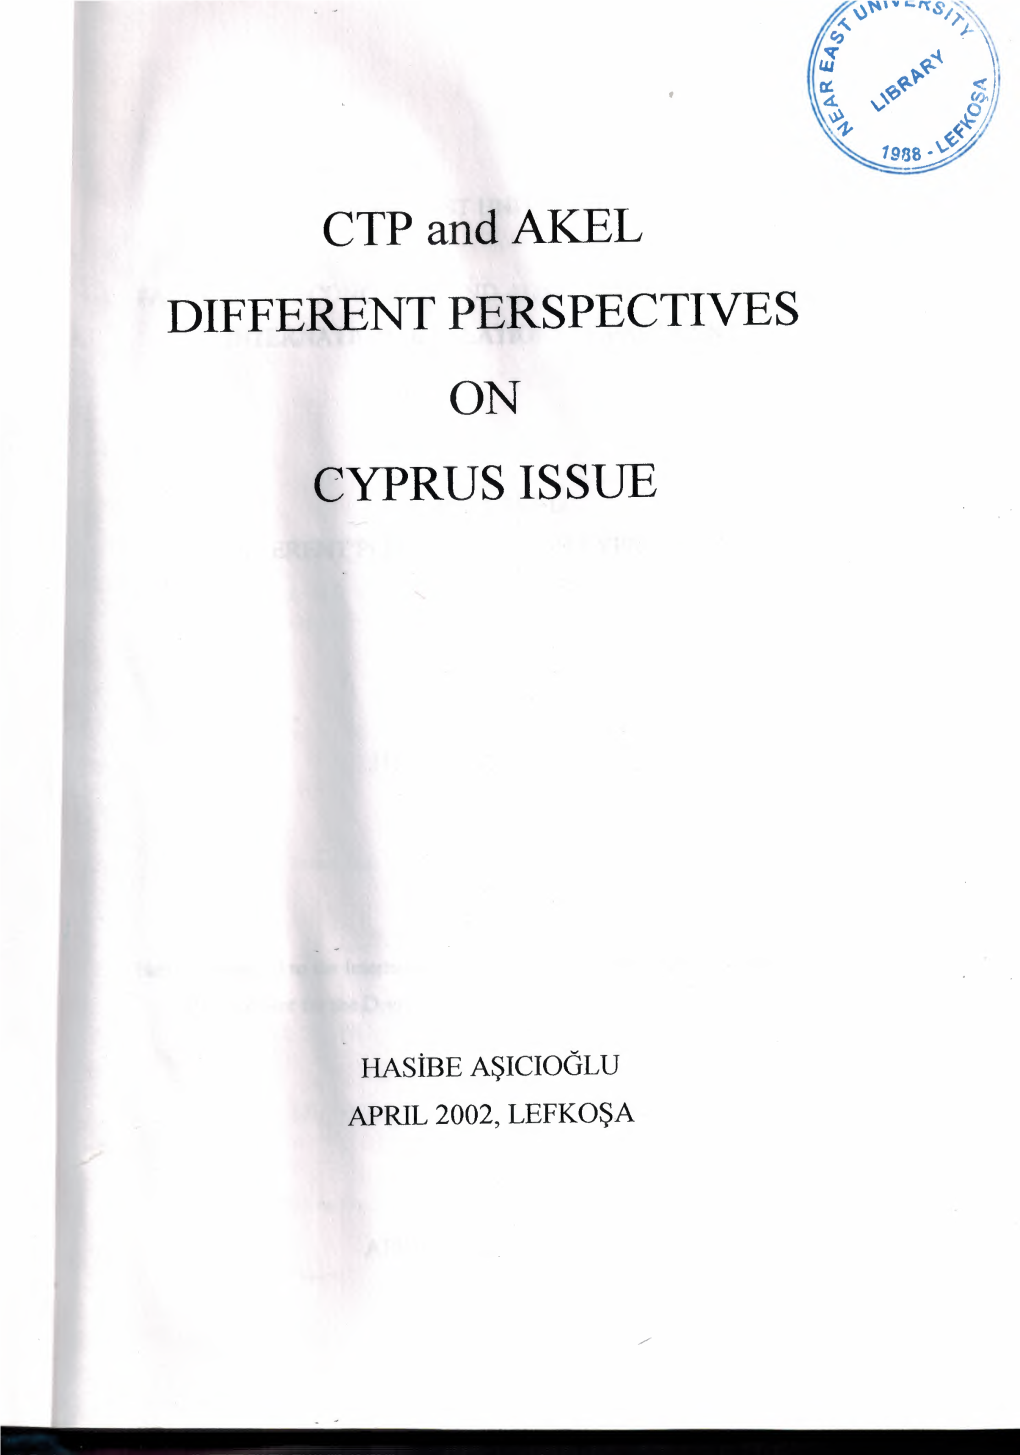 CTP and AKEL DIFFERENT PERSPECTIVES on CYPRUS ISSUE